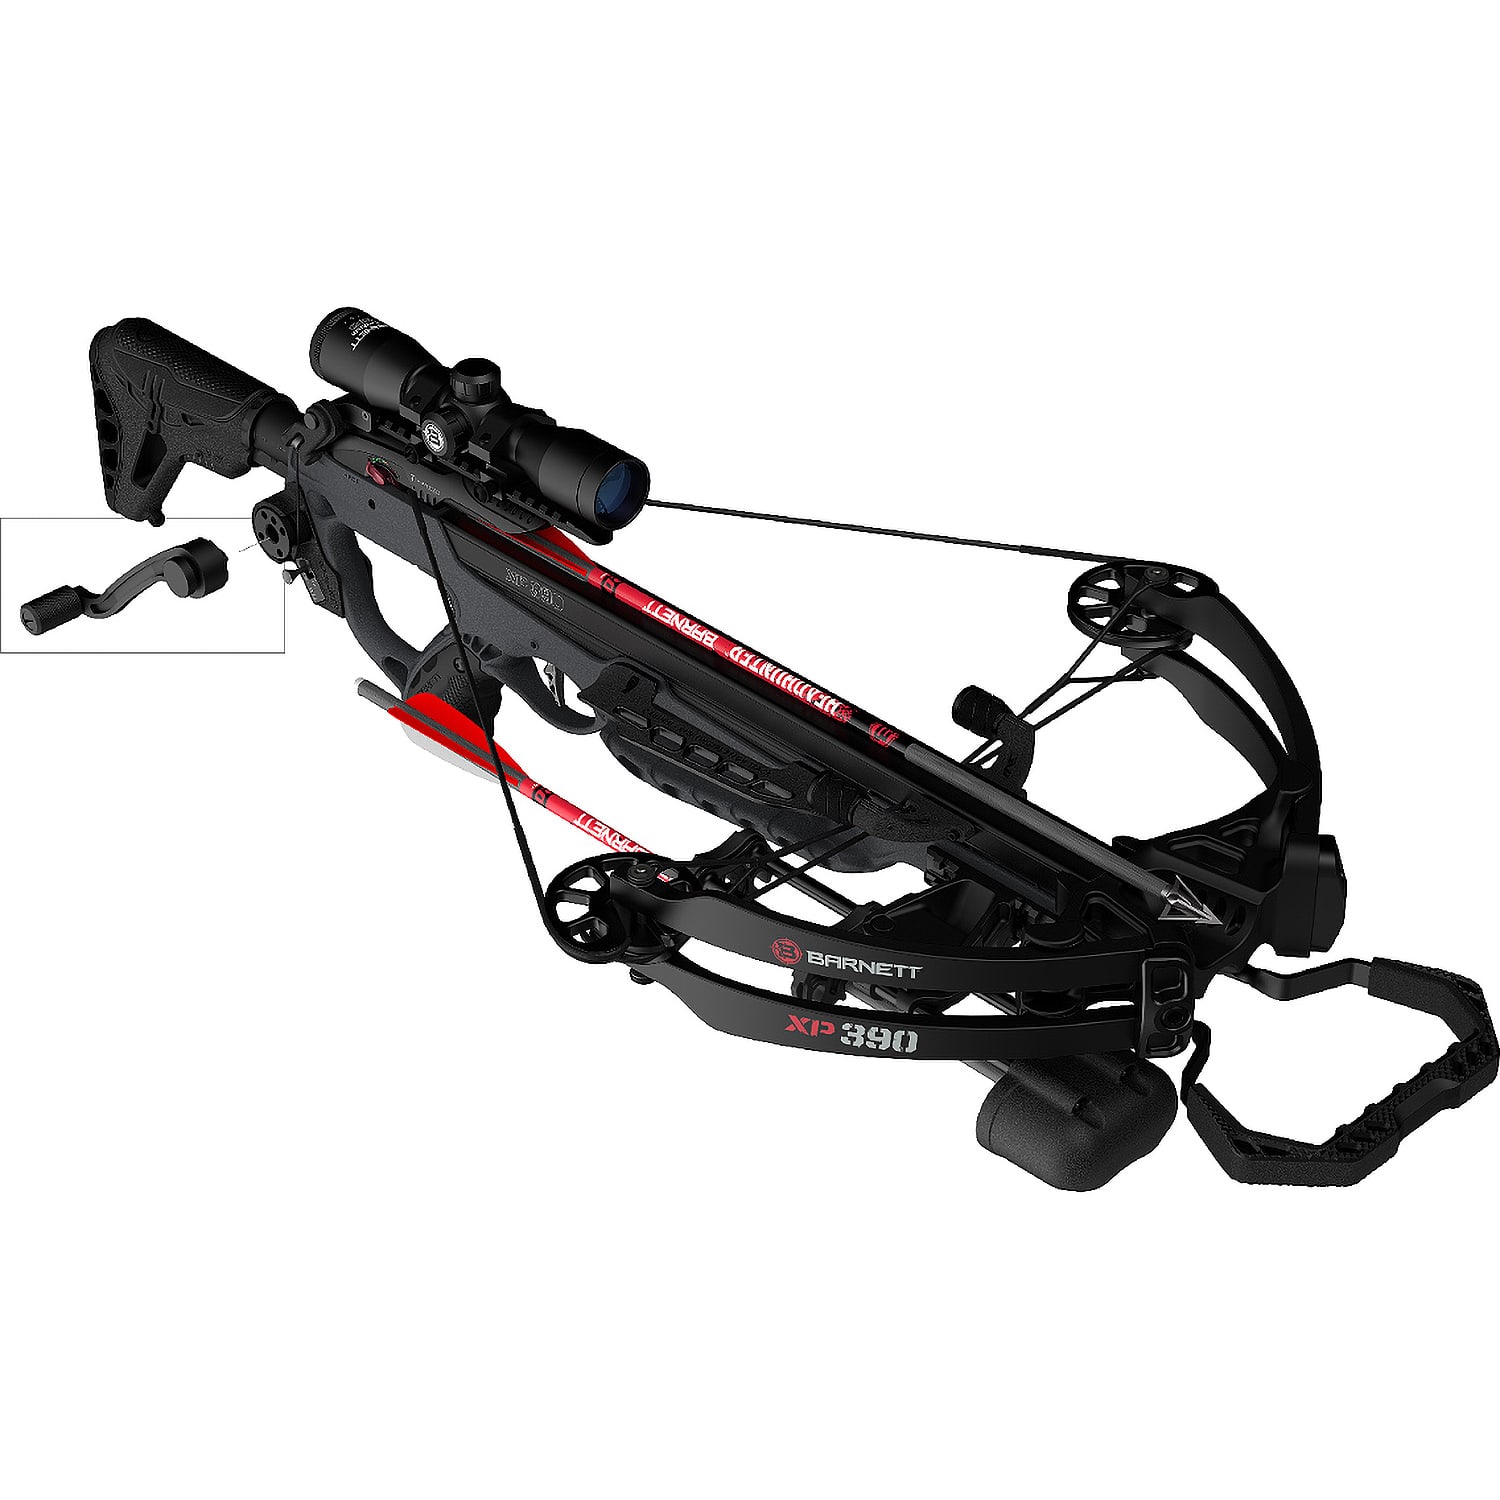 Barnett® XP390 Crossbow Package with Crank Cocking Device